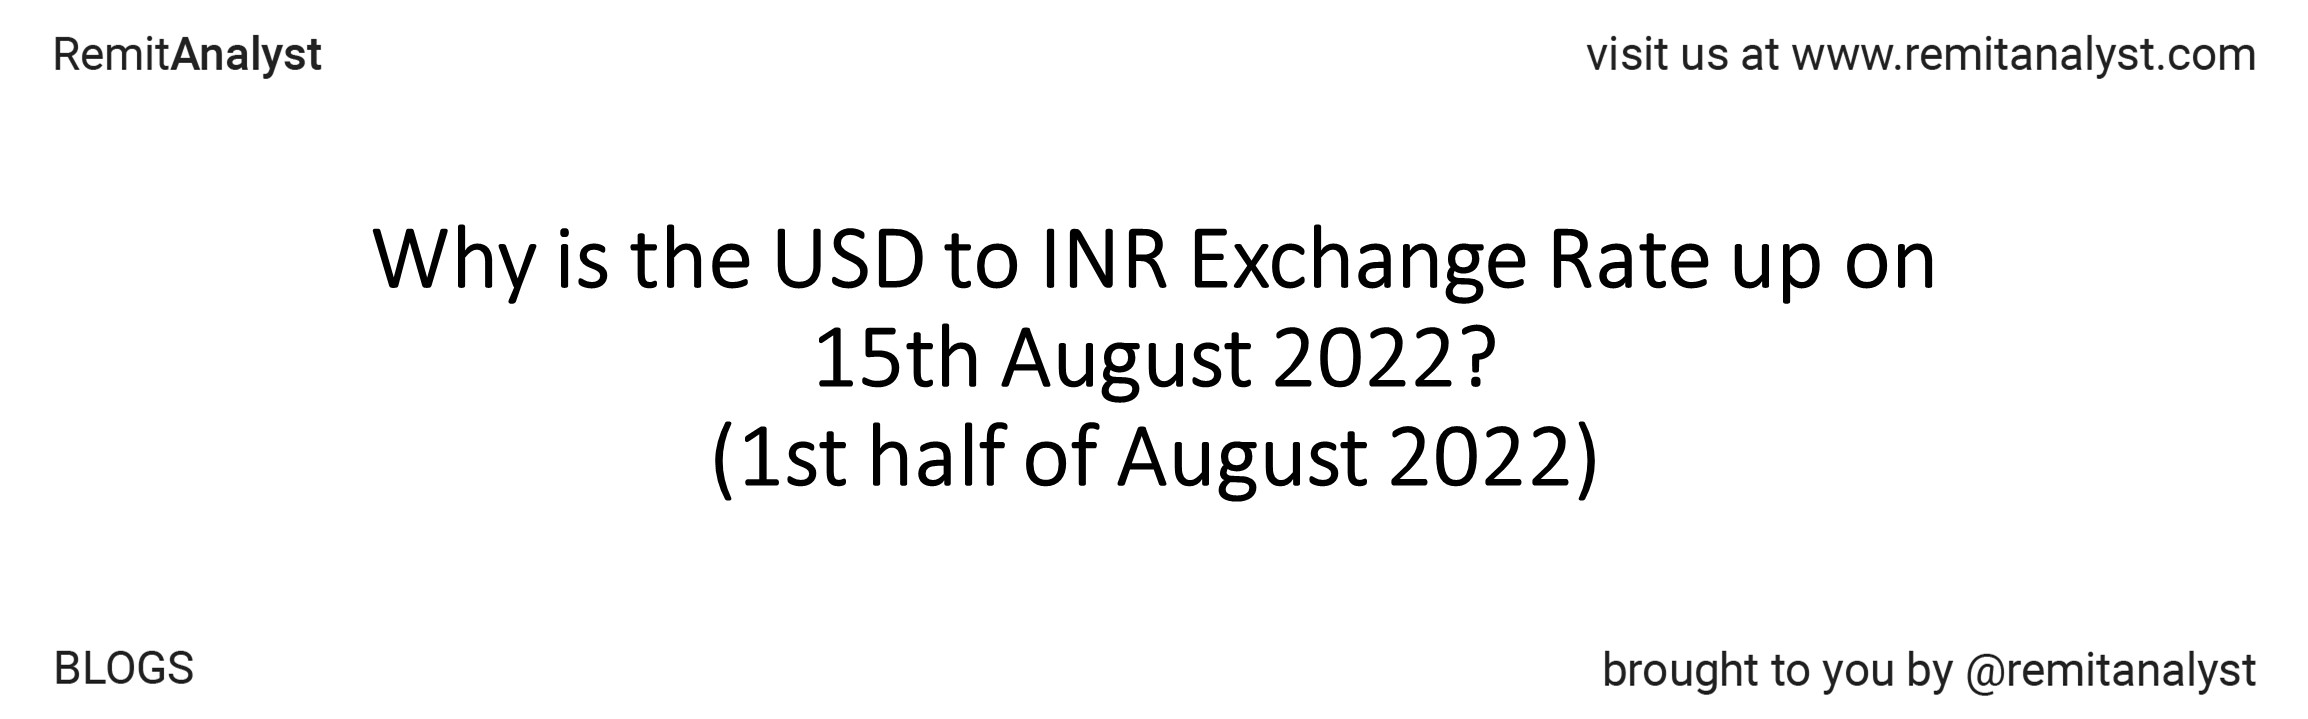 usd-to-inr-exchange-rate-1-Aug-2022-to-15-Aug-2022_title.jpg